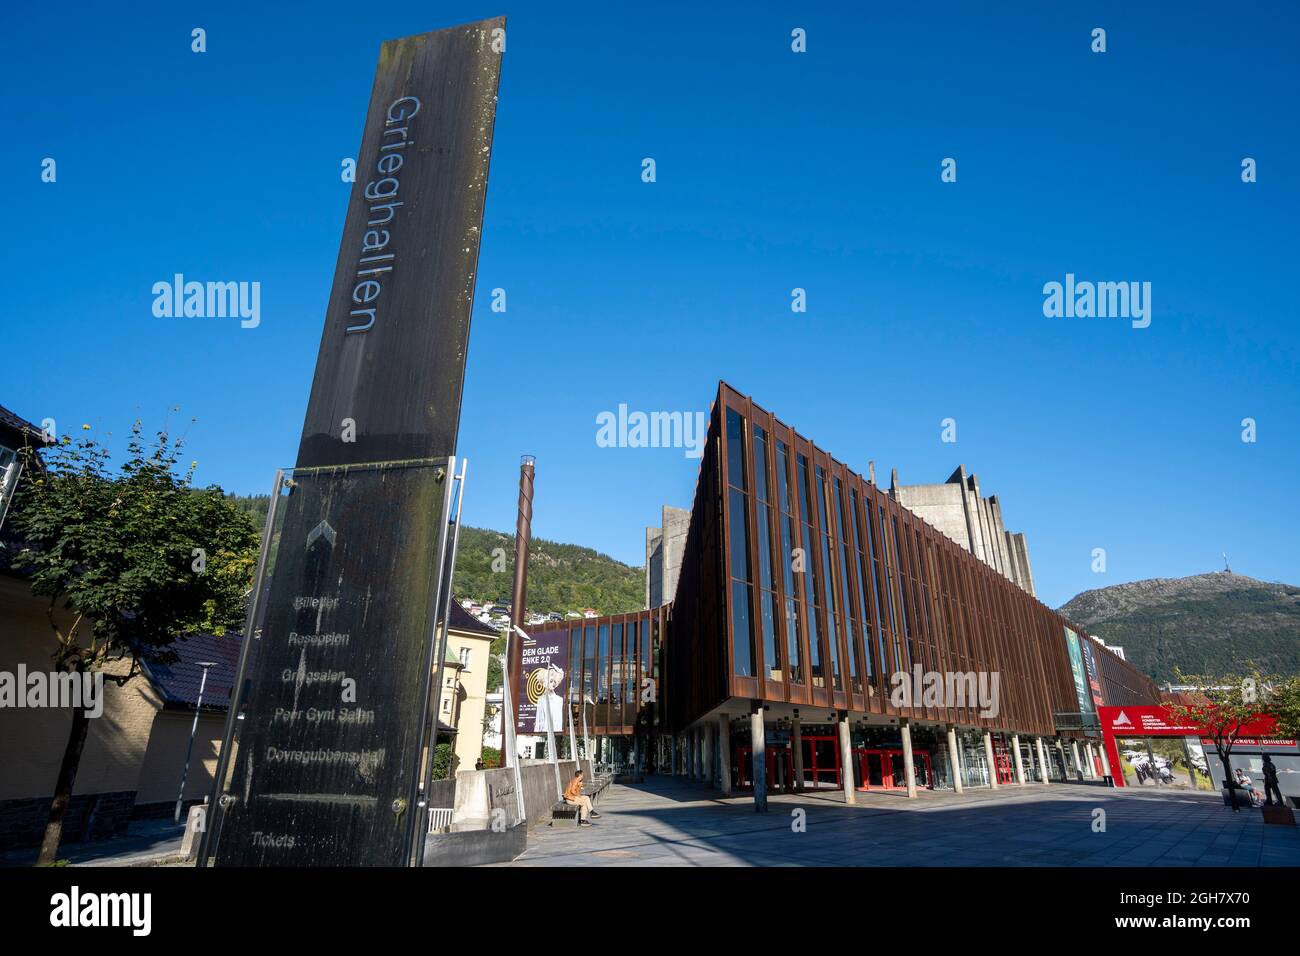 Grieghallen - Grieg Hall is a 1500 seat concert hall located on Edvard Griegs' square in Bergen, Norway Stock Photo